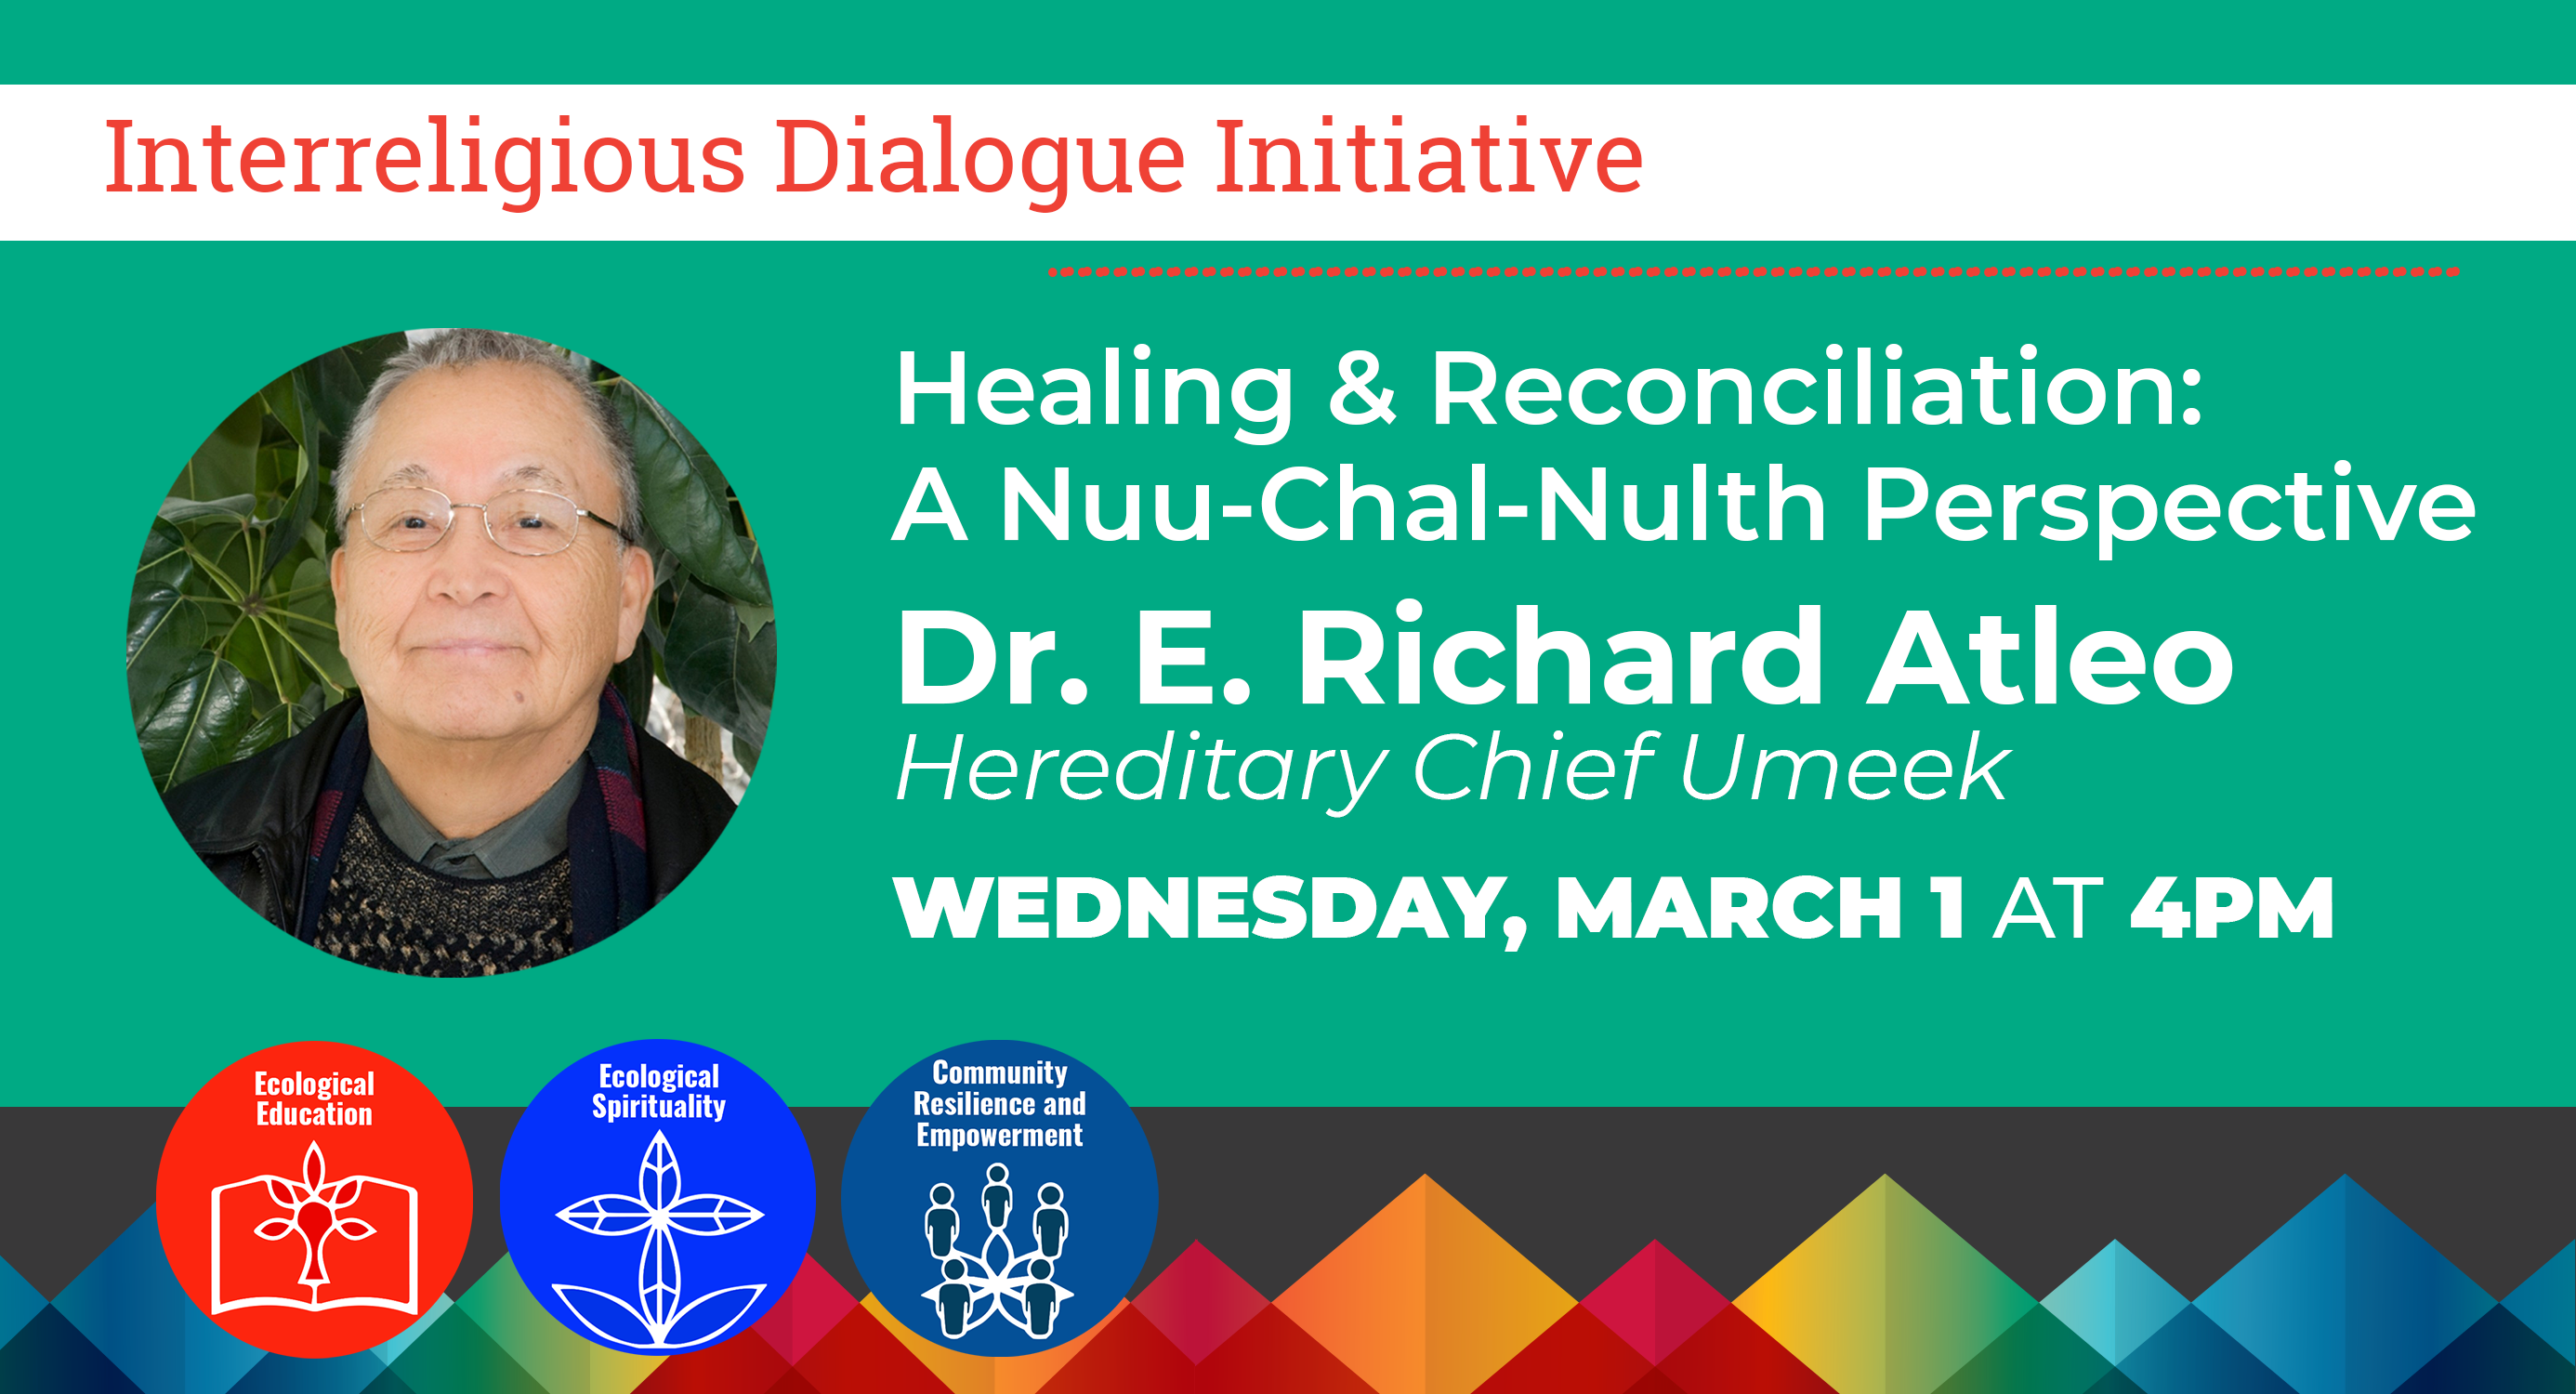 Flyer of event with green background. Photography of Dr. Atleo on the left. On the right with white letters: Healing and Reconciliation: A Nuu-Chal-Nulth Perspective. Dr. E. Richard Atleo, Hereditary Chief Umeek. Wednesday, March 1 at 4 p.m. Three icons of Laudato Si' goals on the bottom left: Ecological Education, Ecological Spirituality, Community Resistance and Empowerment.